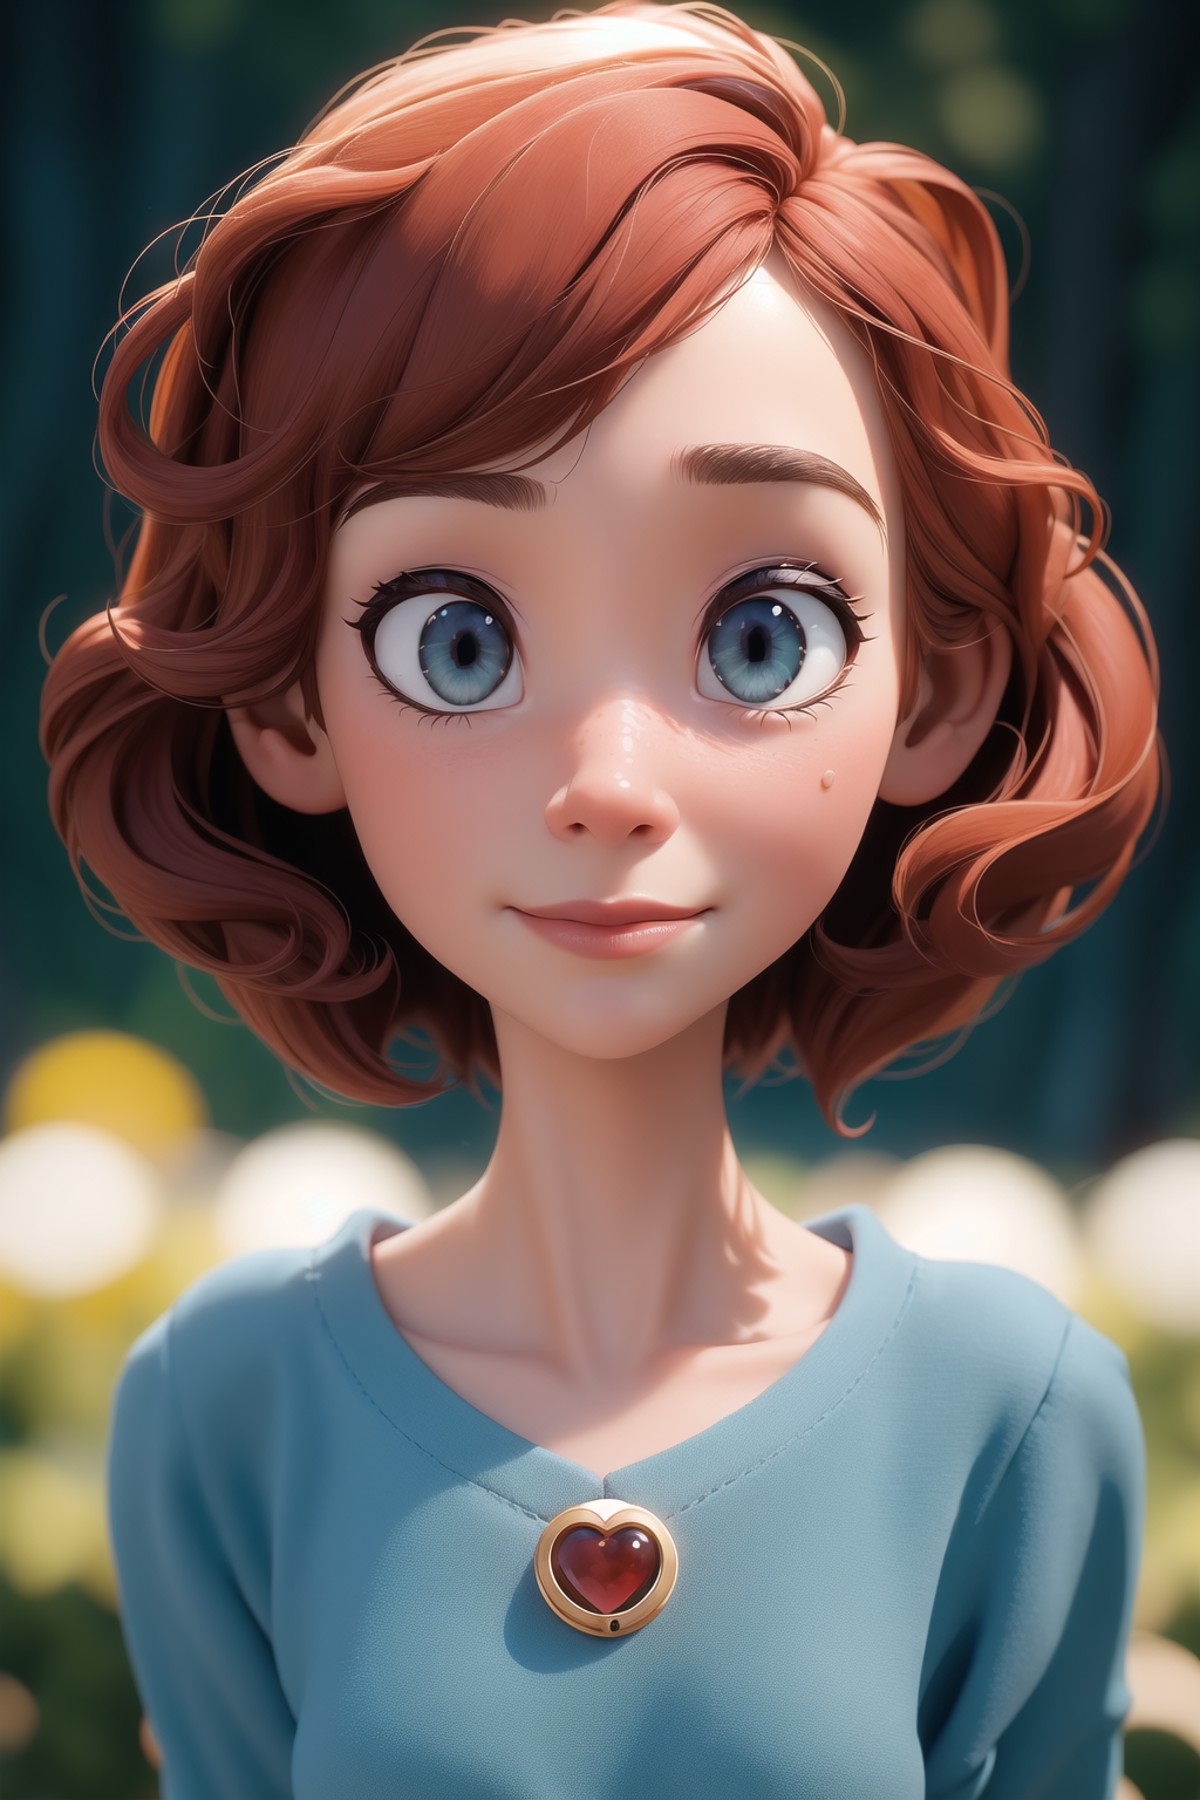 Capture the essence of a 30-year-old woman through a portrait shot, shot with a 50mm f1.2 lens, in the beloved Pixar anima...